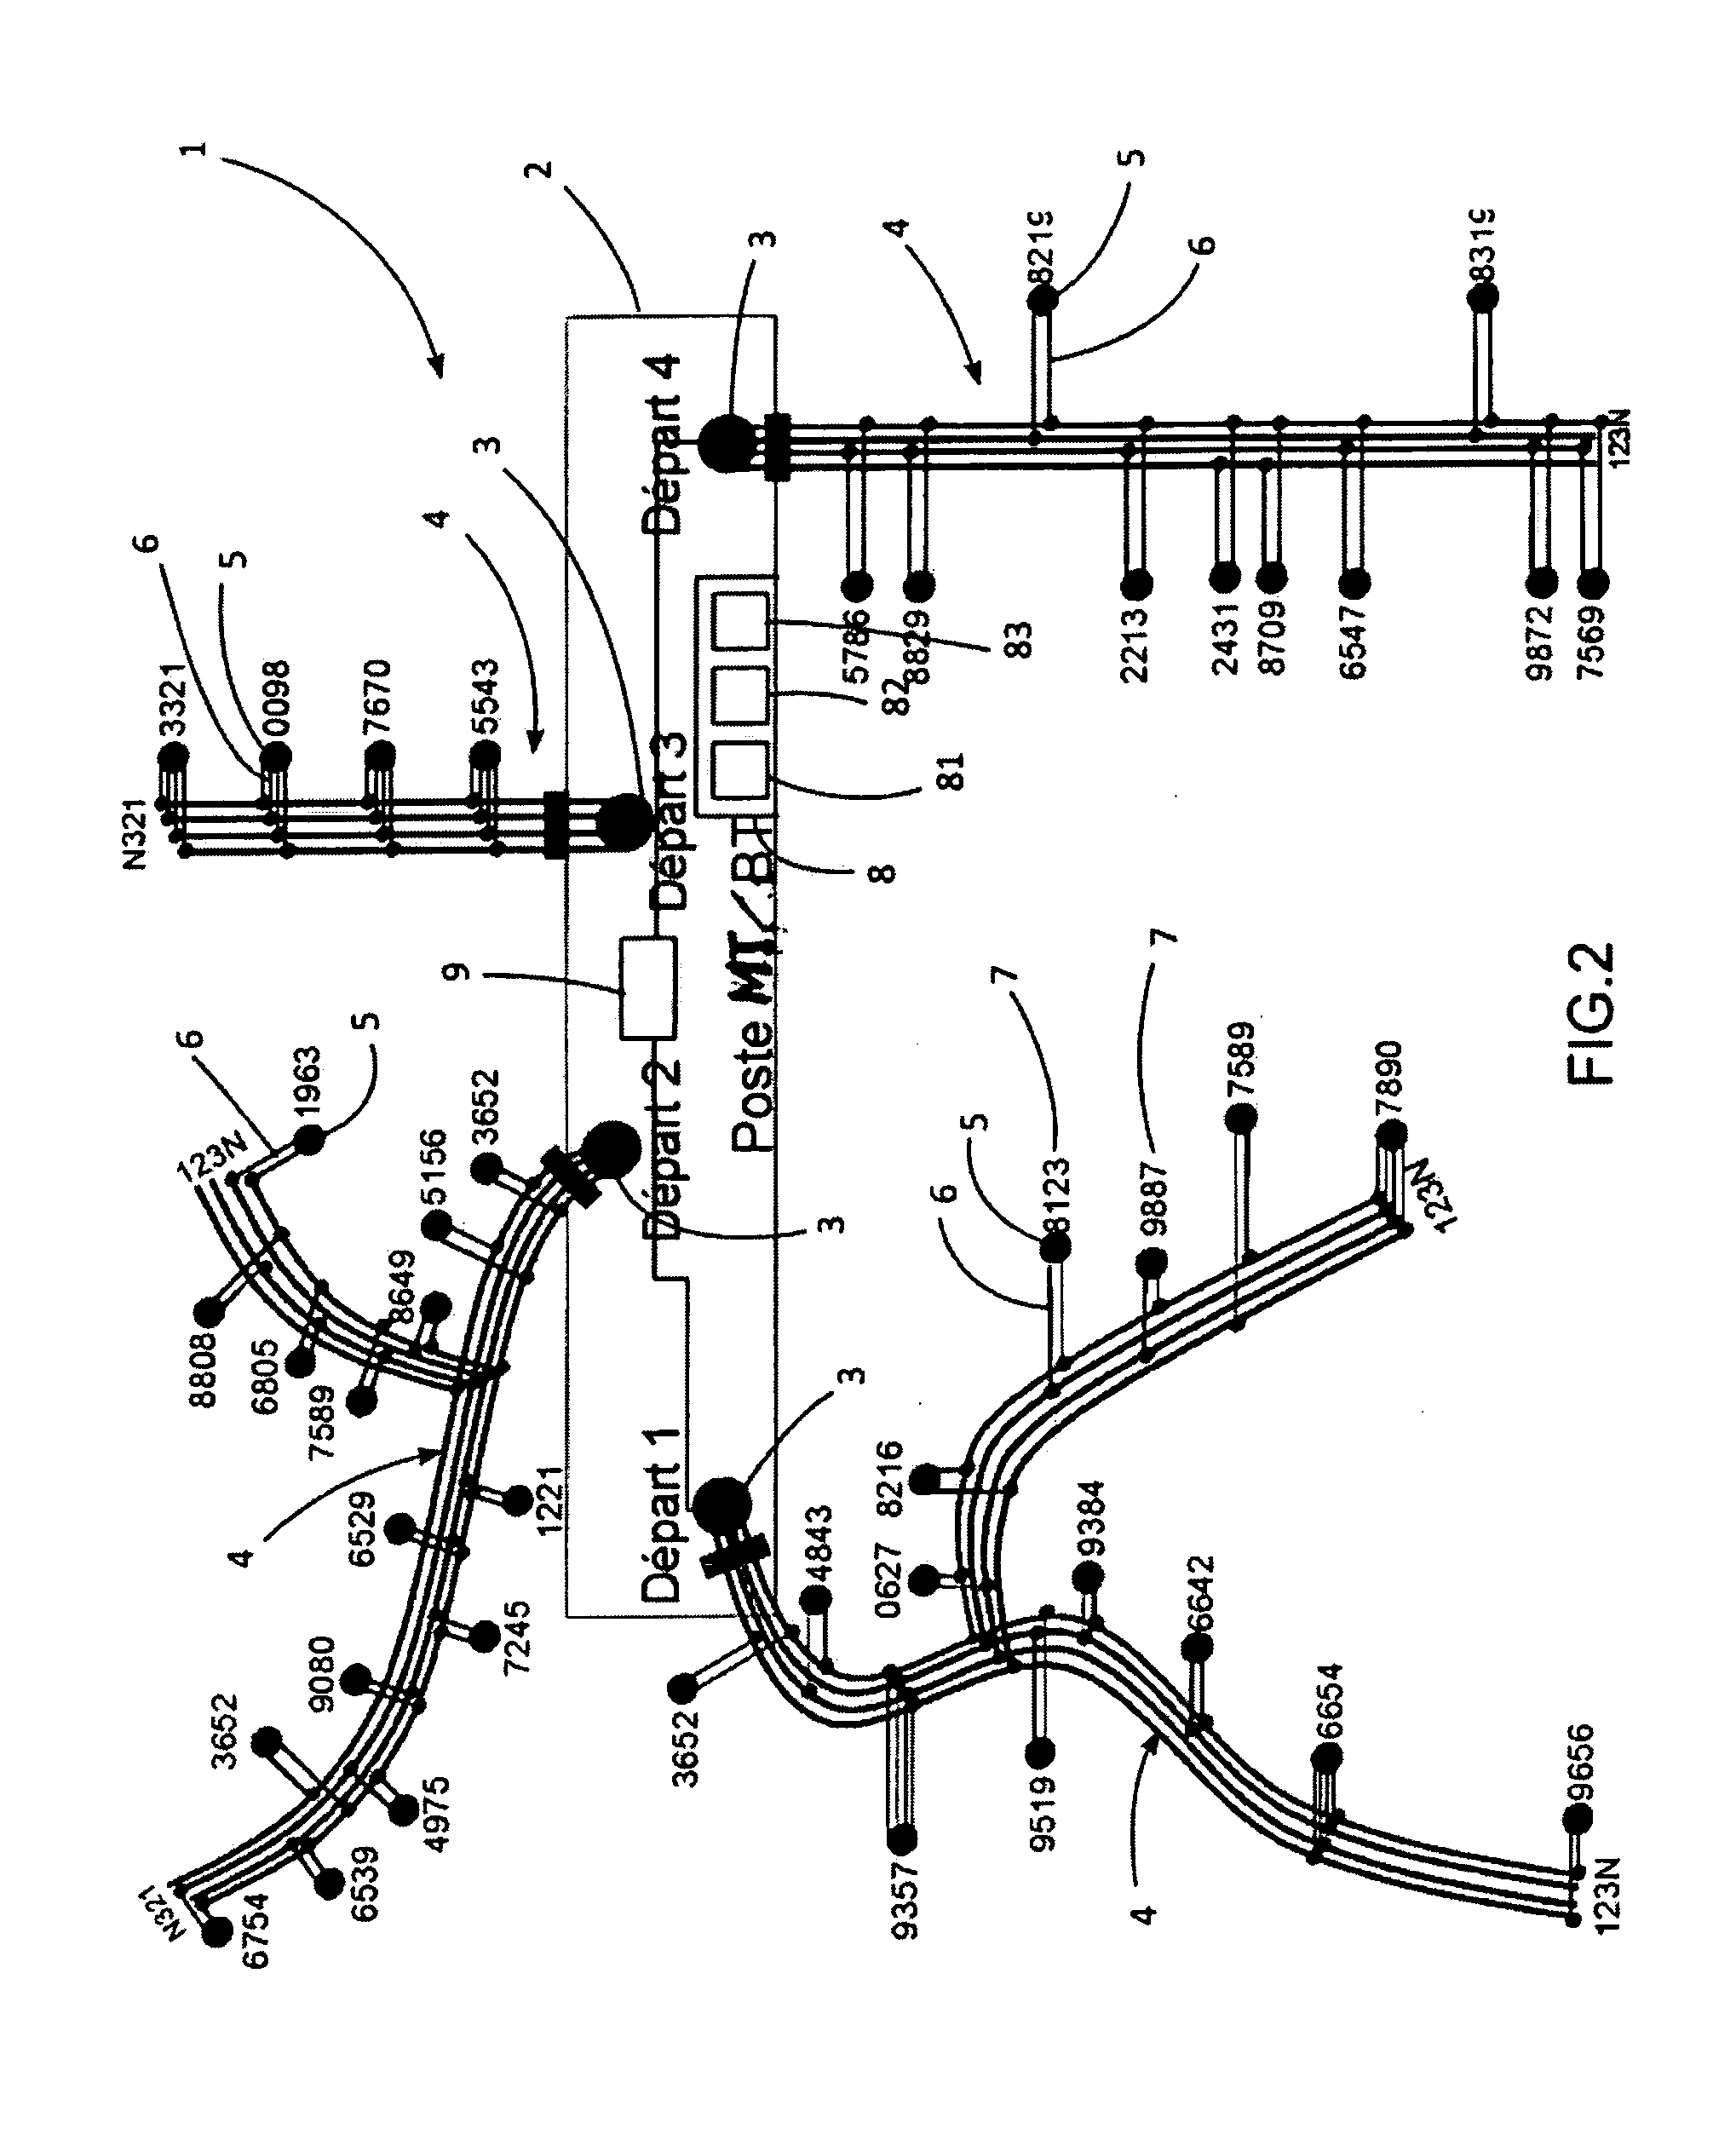 Process and device to determine a structure of an electric power distribution network